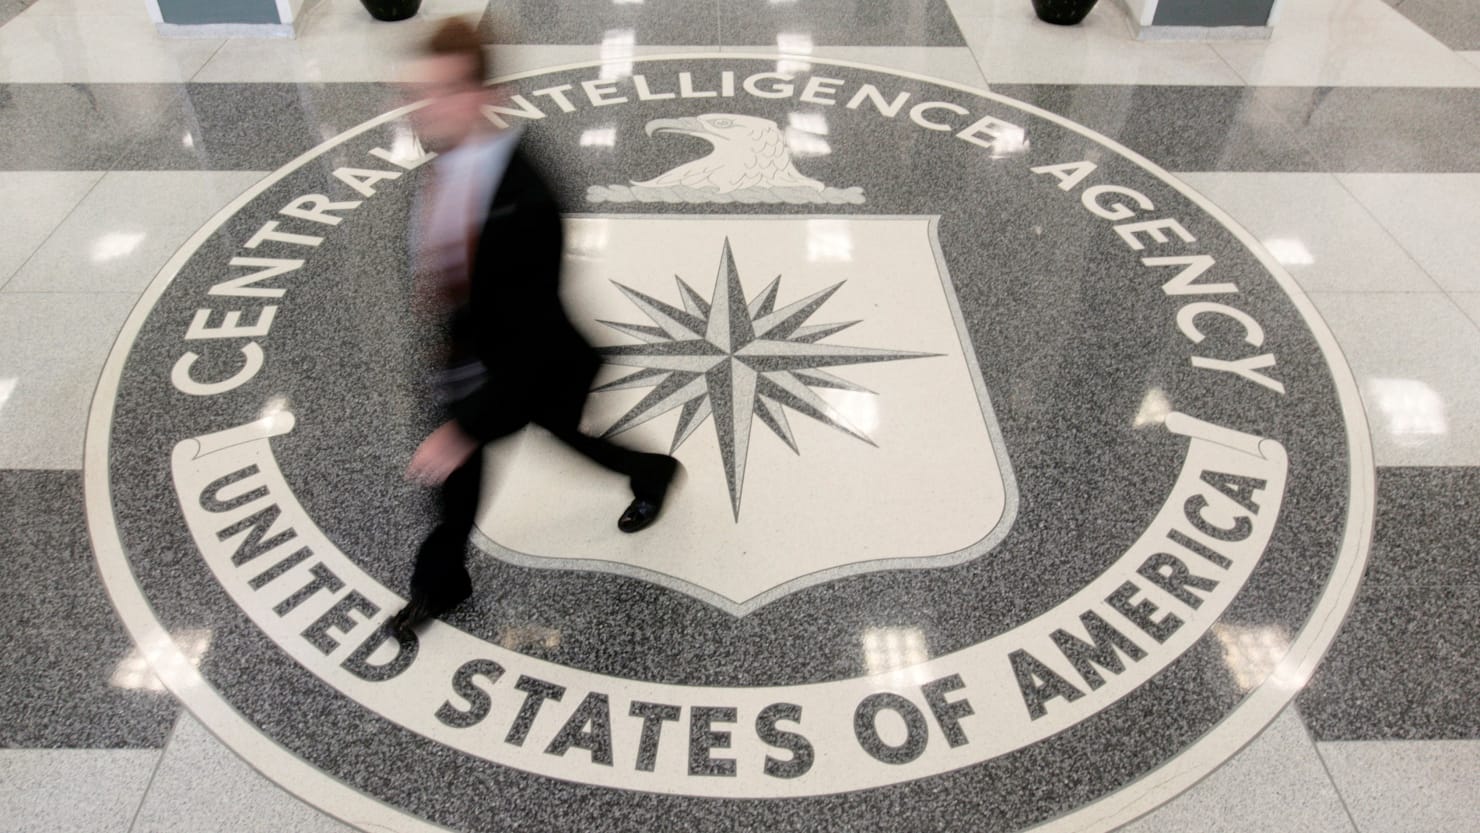 Former CIA Software Engineer Sentenced to 40 Years in Prison for Espionage, WikiLeaks Sharing, and Child Pornography Possession